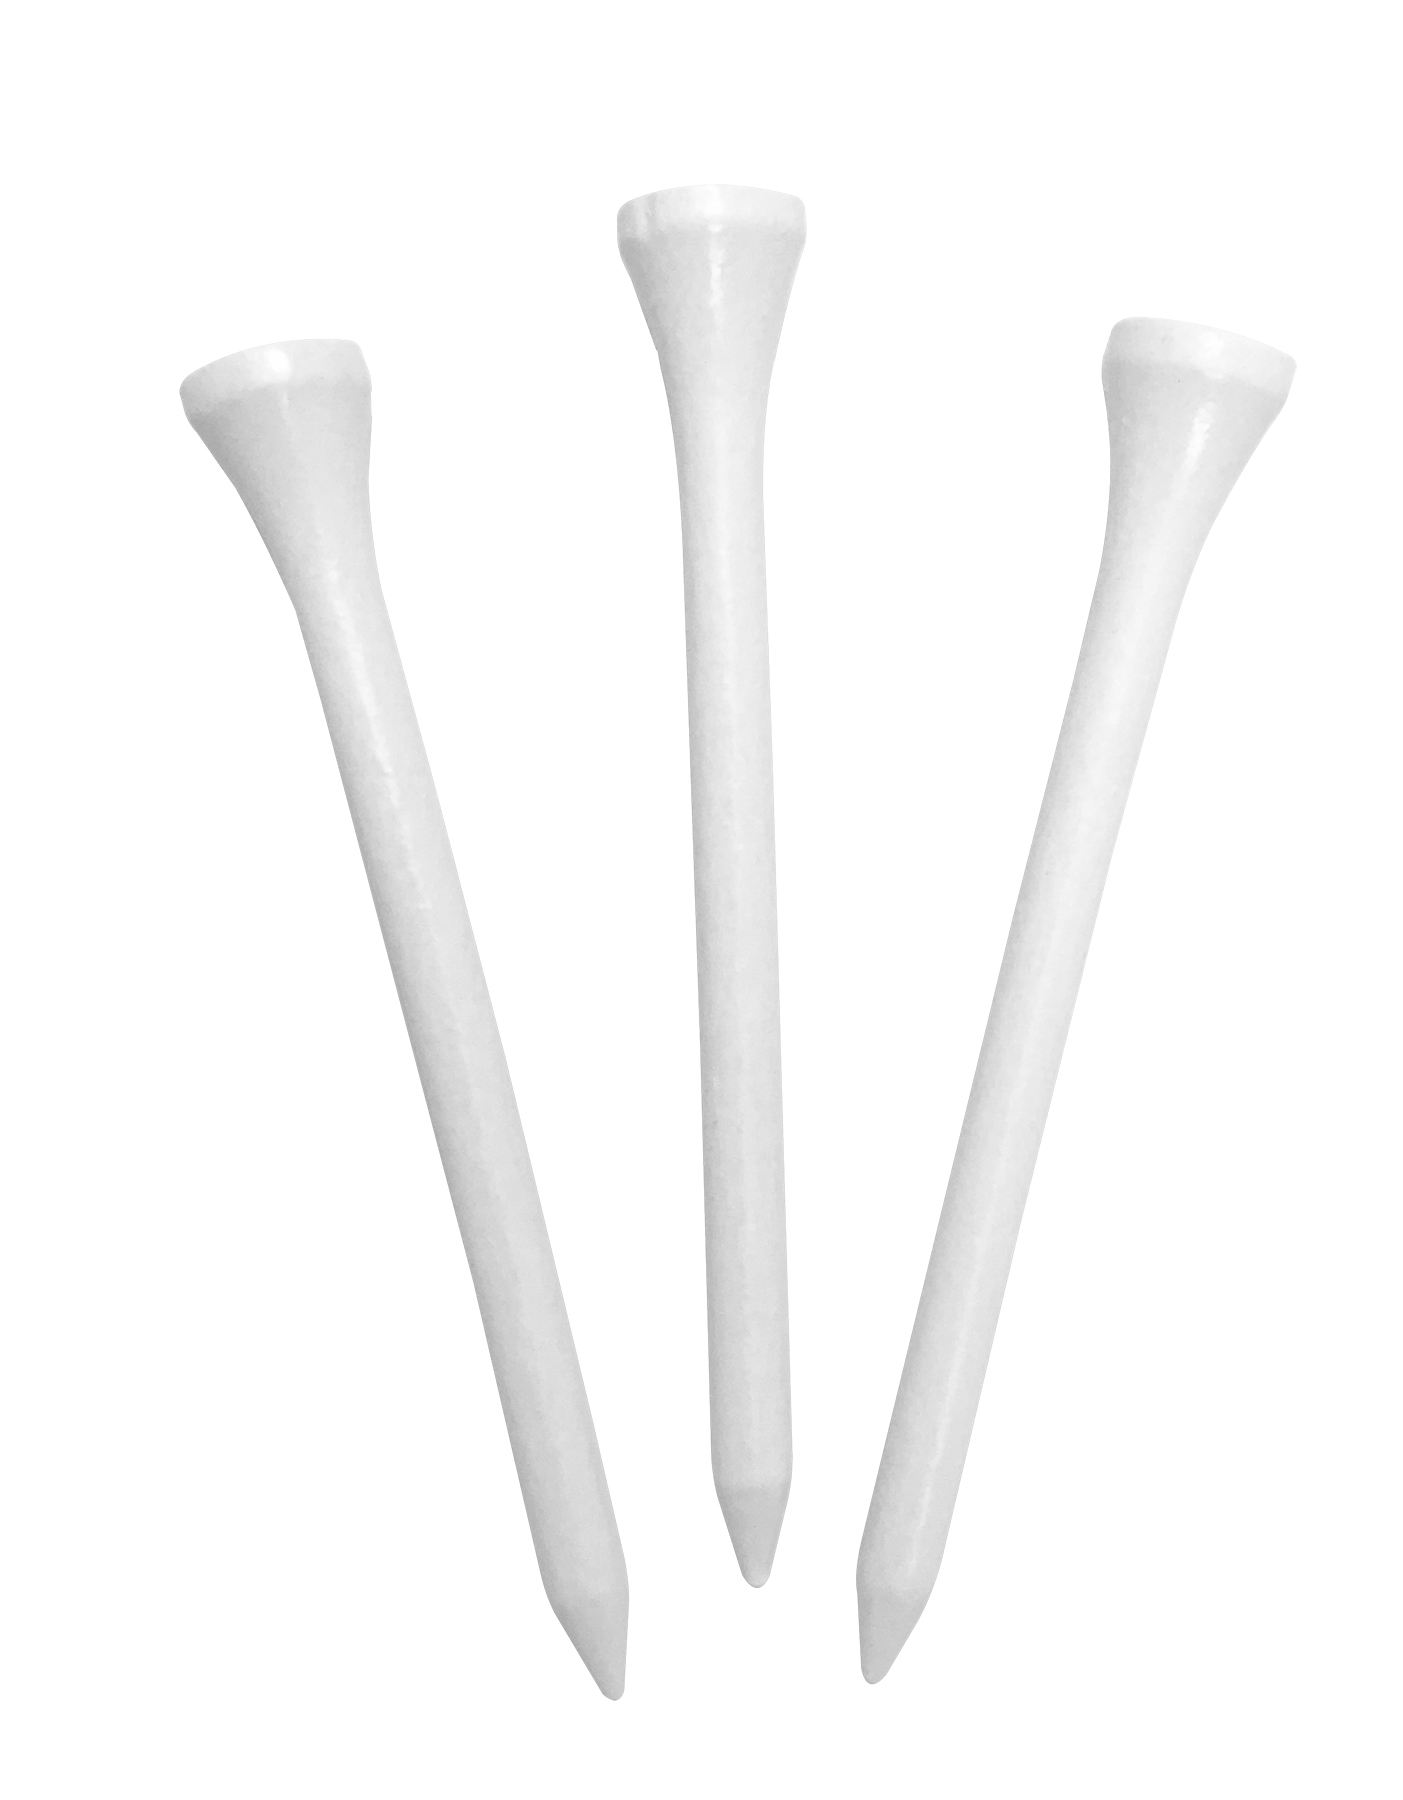 Pride Wood Golf Tee, 3-1/4 inch, White, 90 Count - image 2 of 6